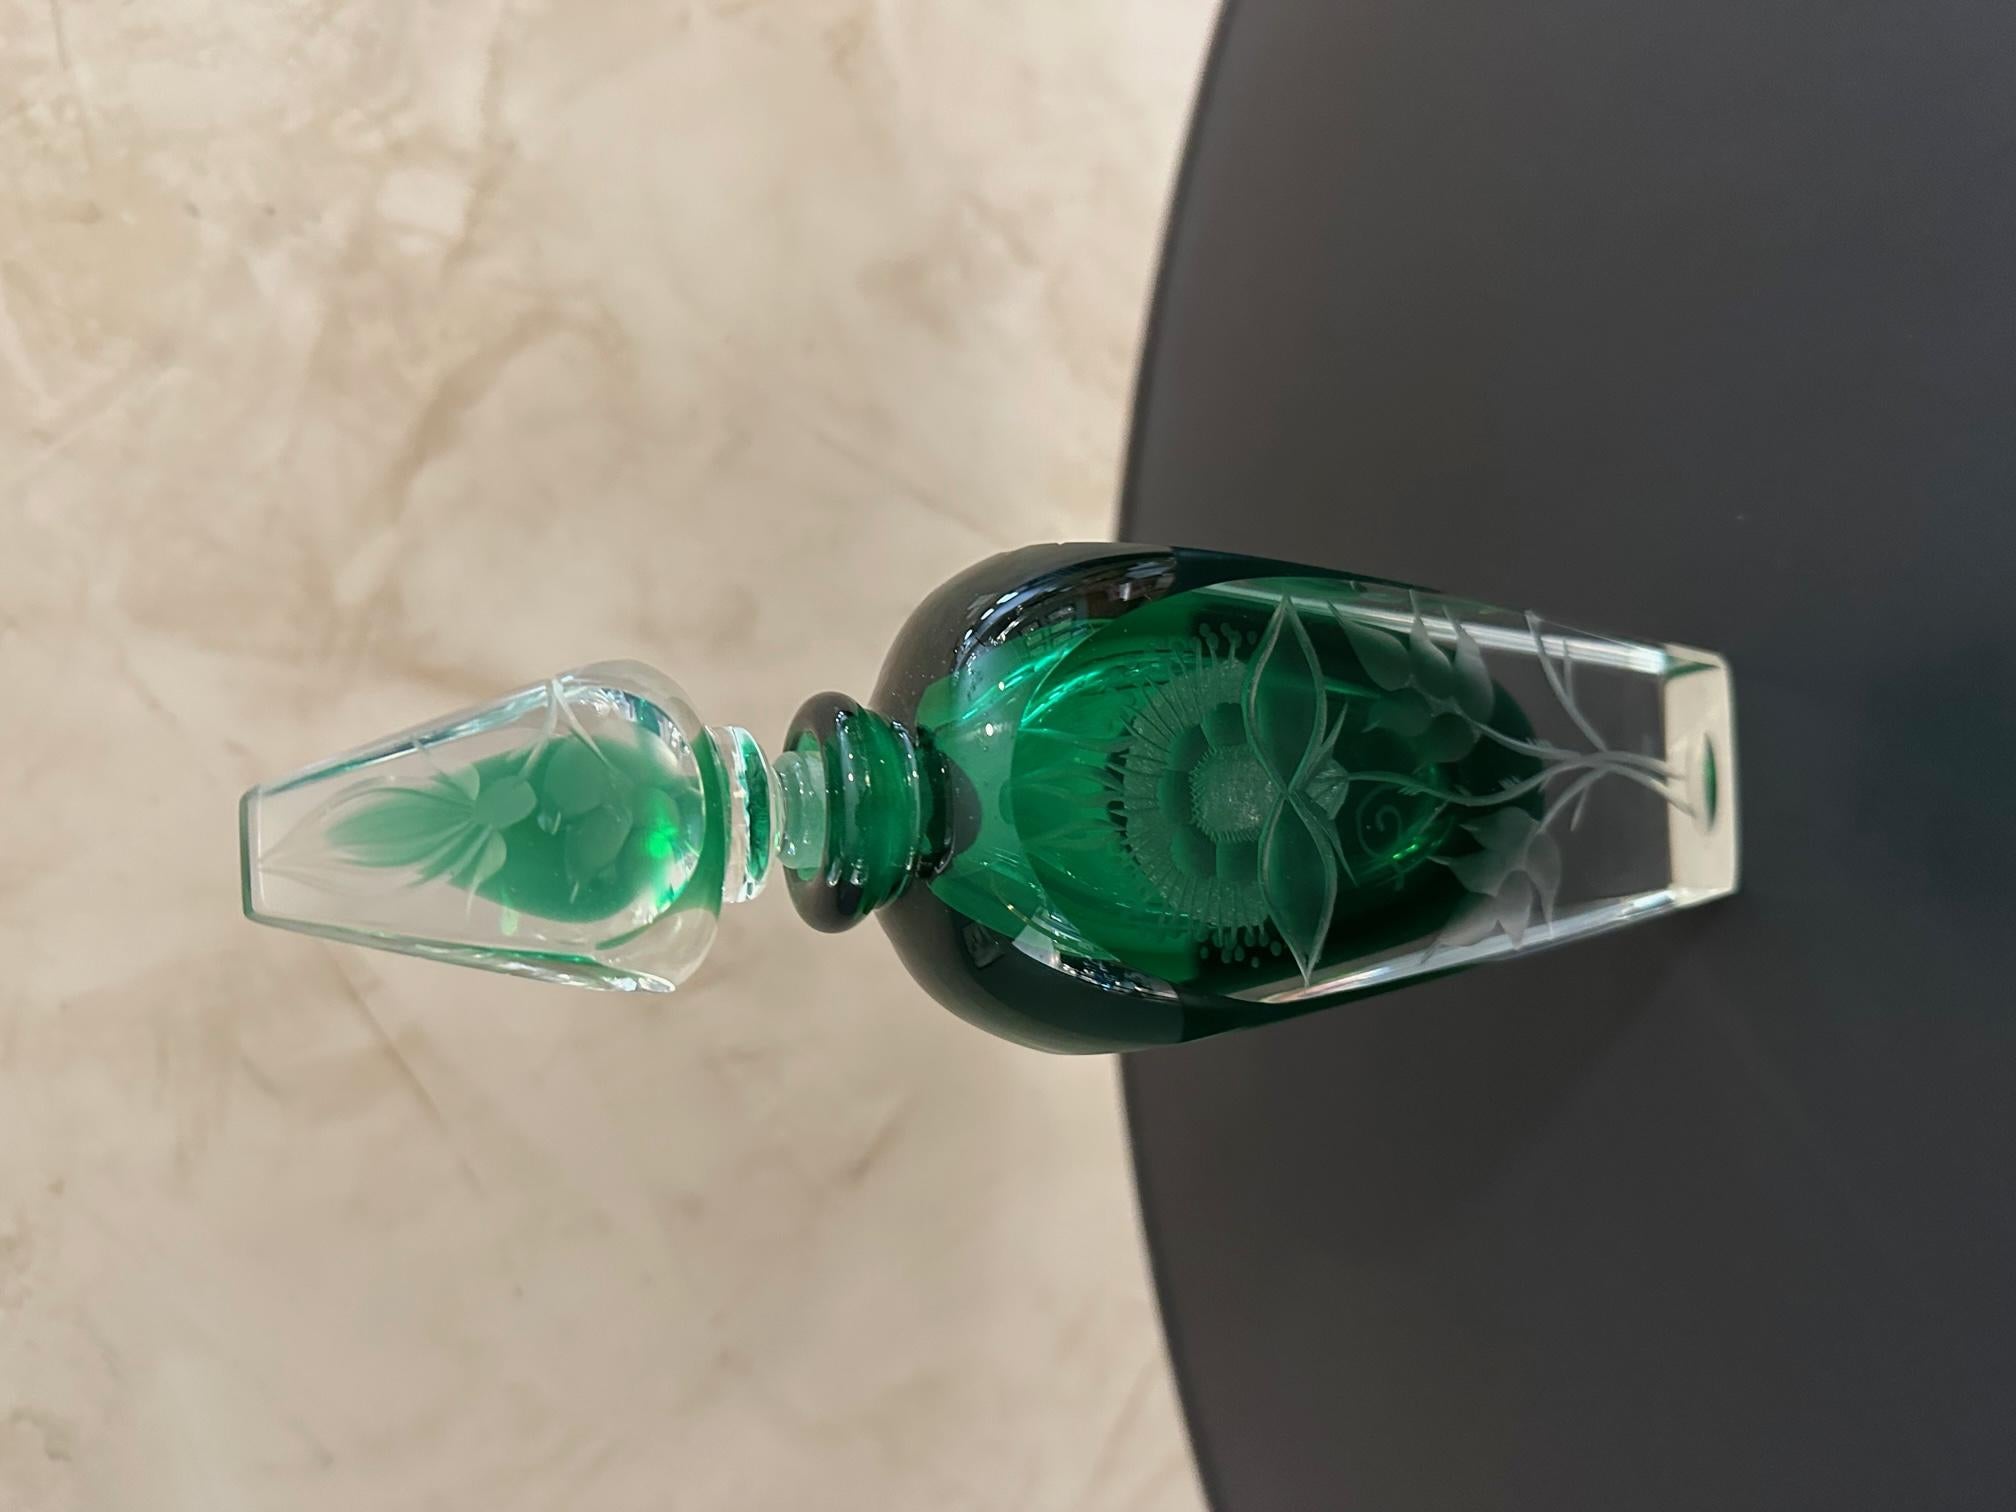 Very beautiful green crystal perfume bottle engraved with flowers. Removable cap also engraved.
Very good quality and good condition.